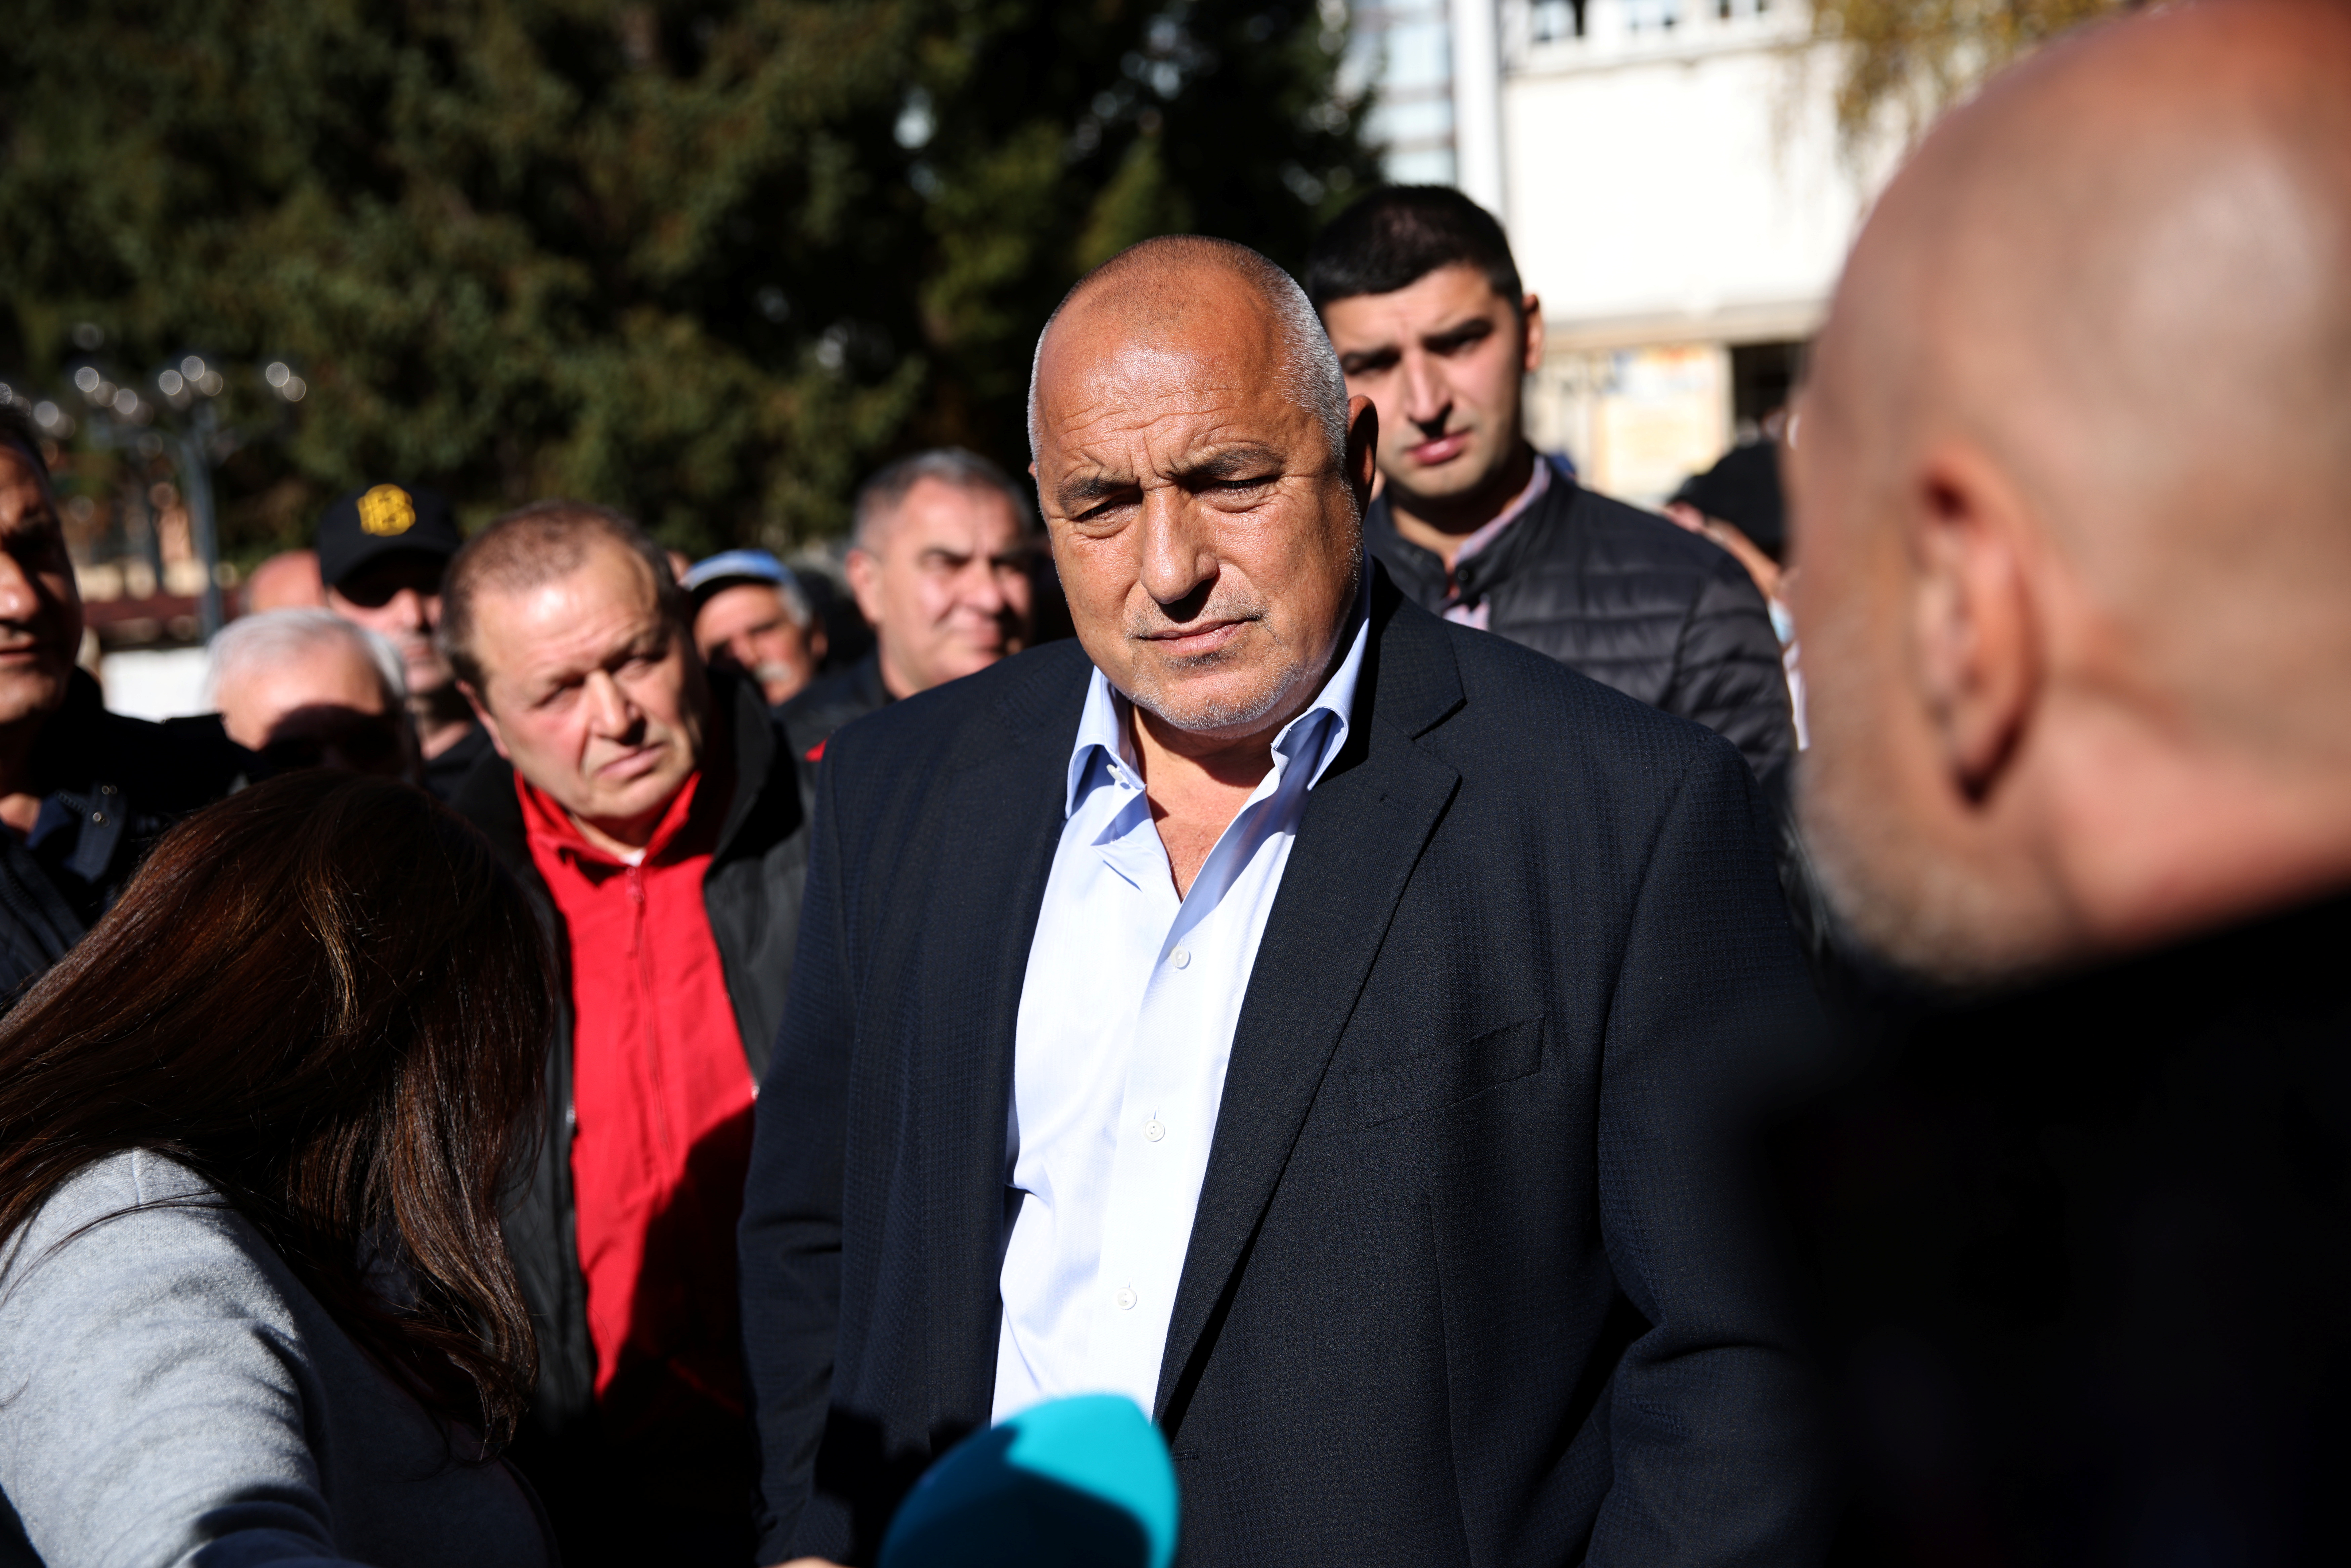 Boyko Borissov, former Bulgarian Prime Minister and leader of centre-right GERB party looks on after meeting supporters in the town of Teteven, Bulgaria, November 10, 2021. Picture taken November 10, 2021. REUTERS/Stoyan Nenov